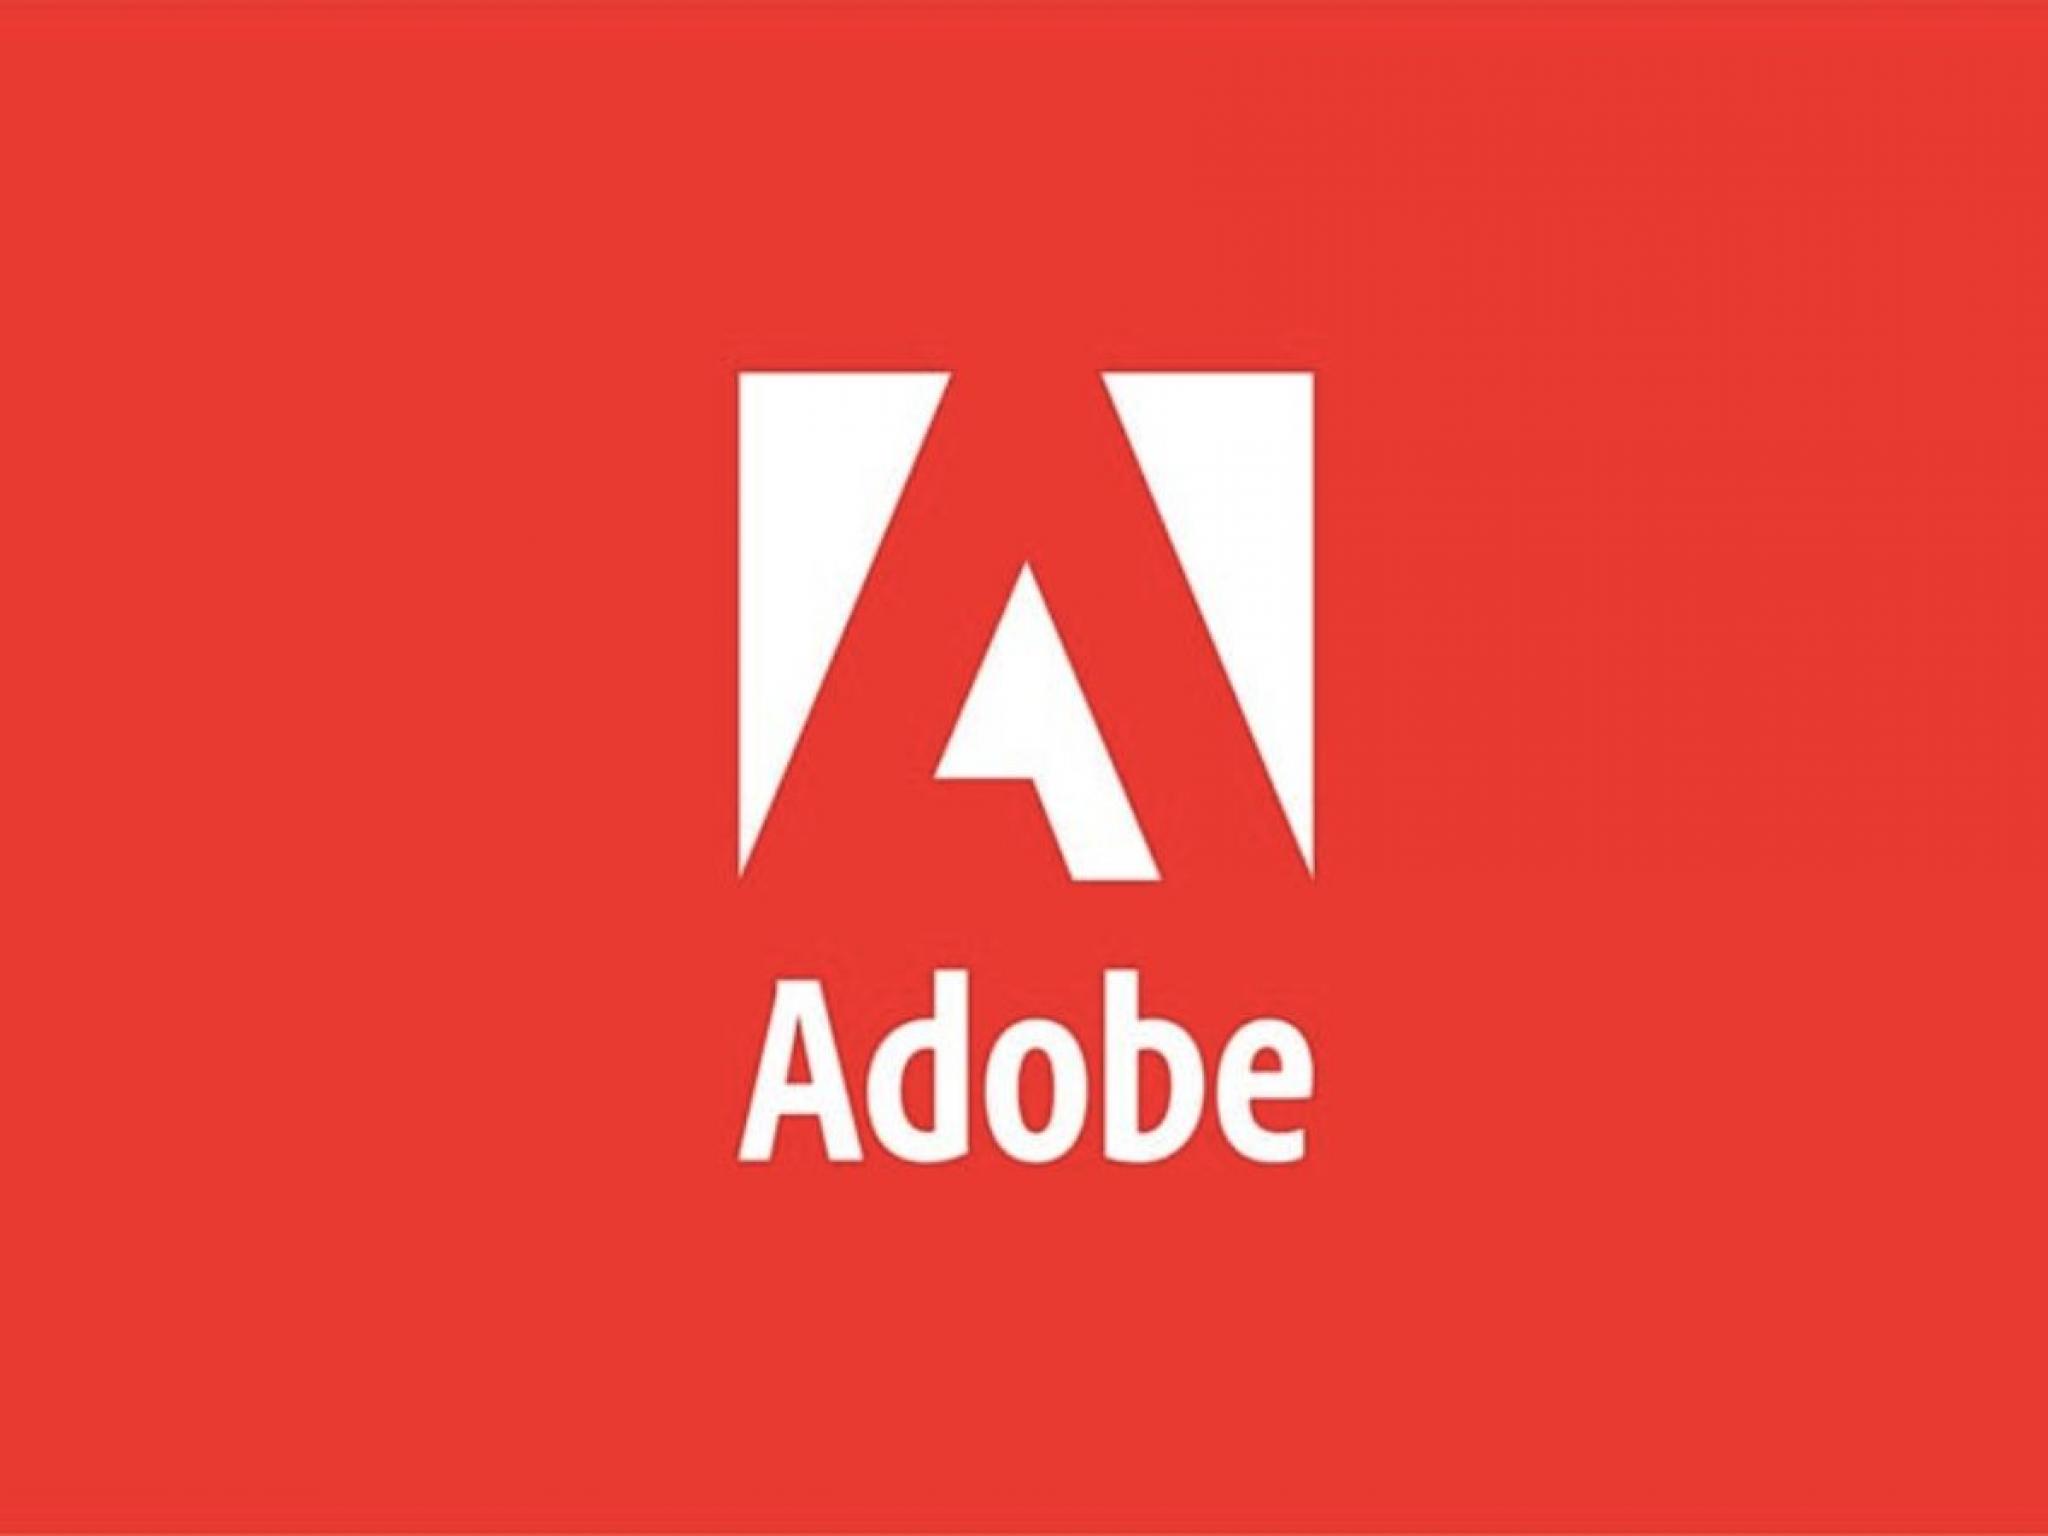  adobe-issues-weak-forecast-joins-mueller-water-products-aersale-and-other-big-stocks-moving-lower-in-thursdays-pre-market-session 